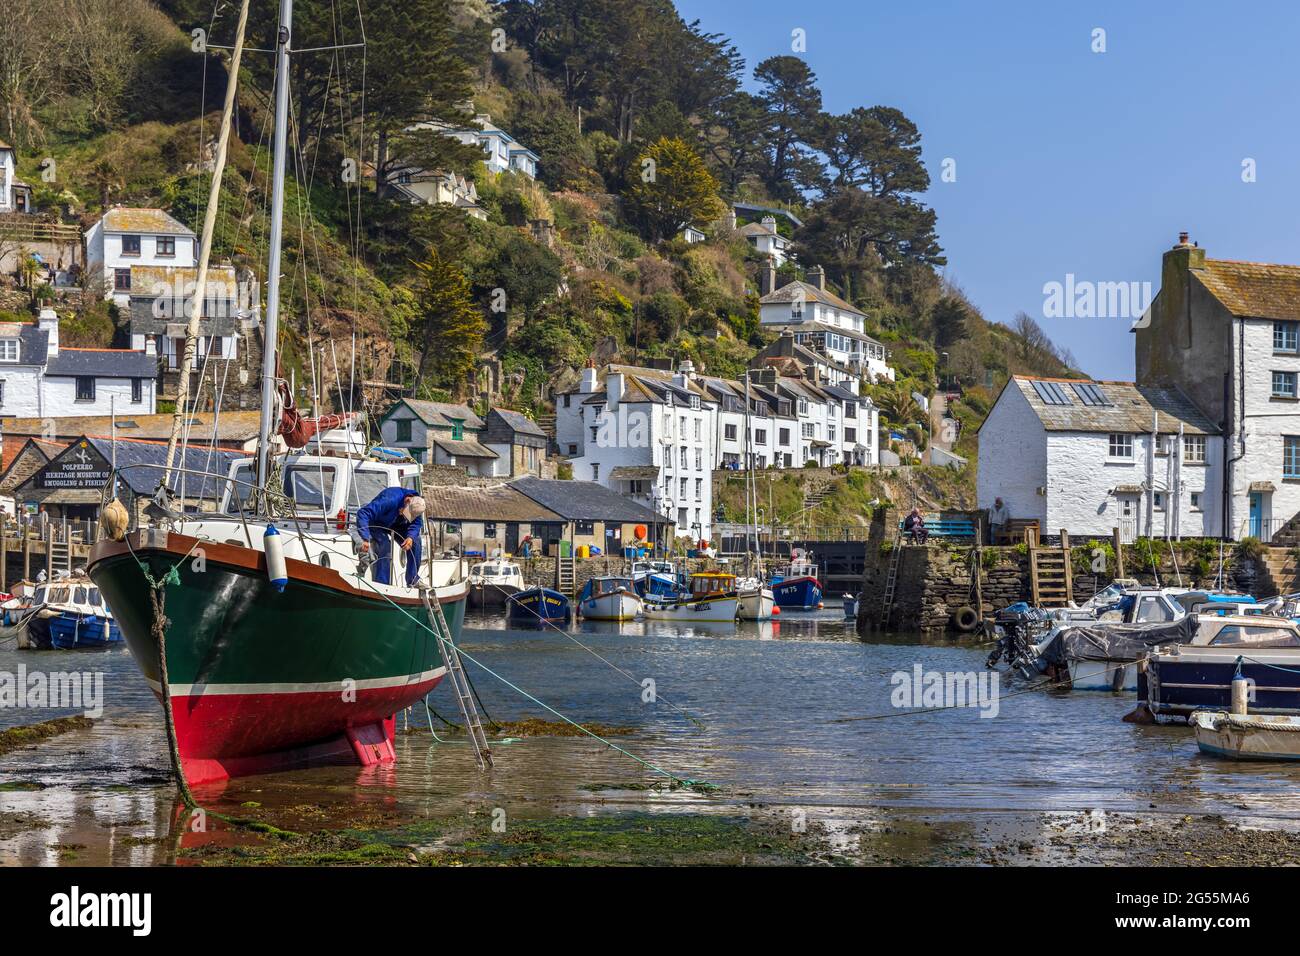 Boat maintenance at Polperro, a charming and picturesque fishing village in south east Cornwall.  It is a truly delightful place to visit. Stock Photo